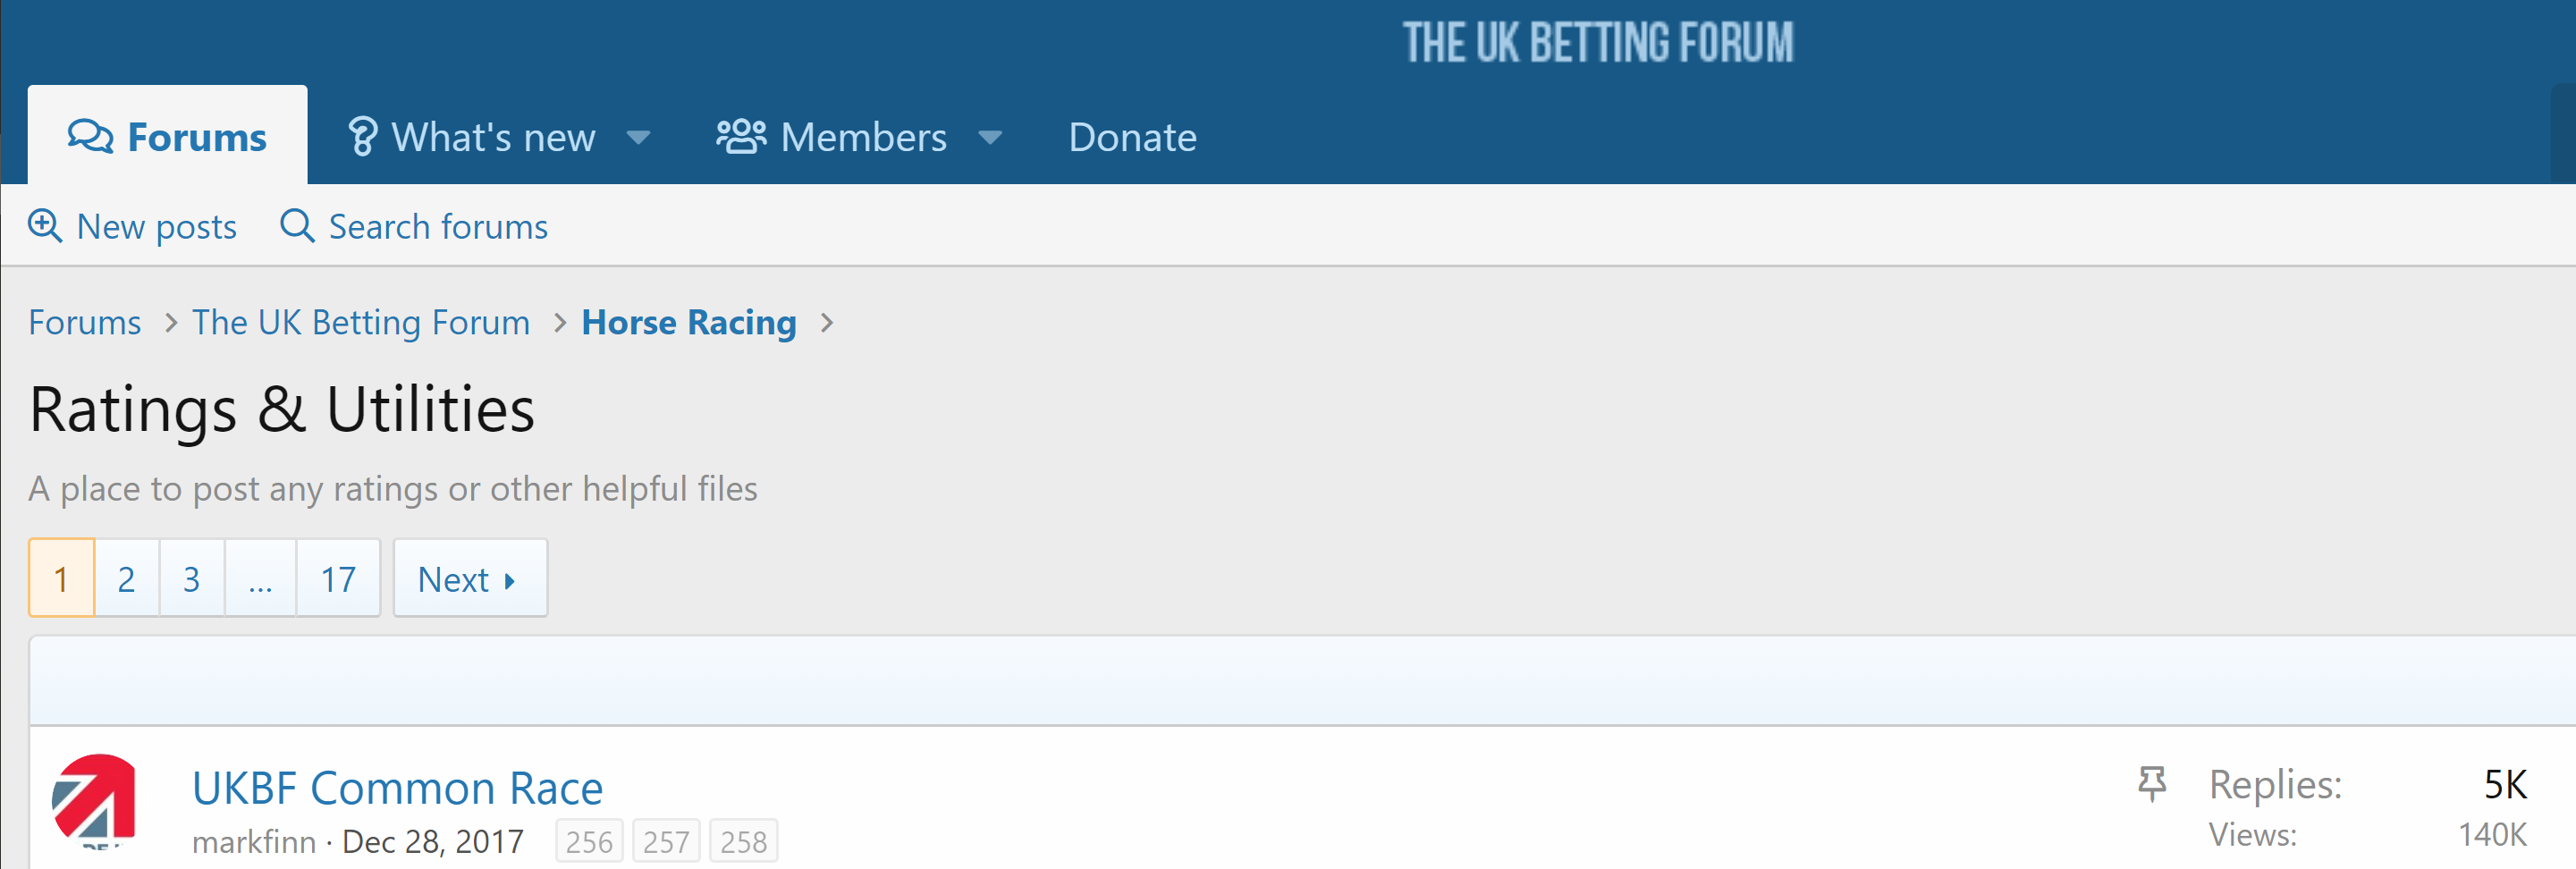 The UK Betting Forum Trial Offer Inform Racing